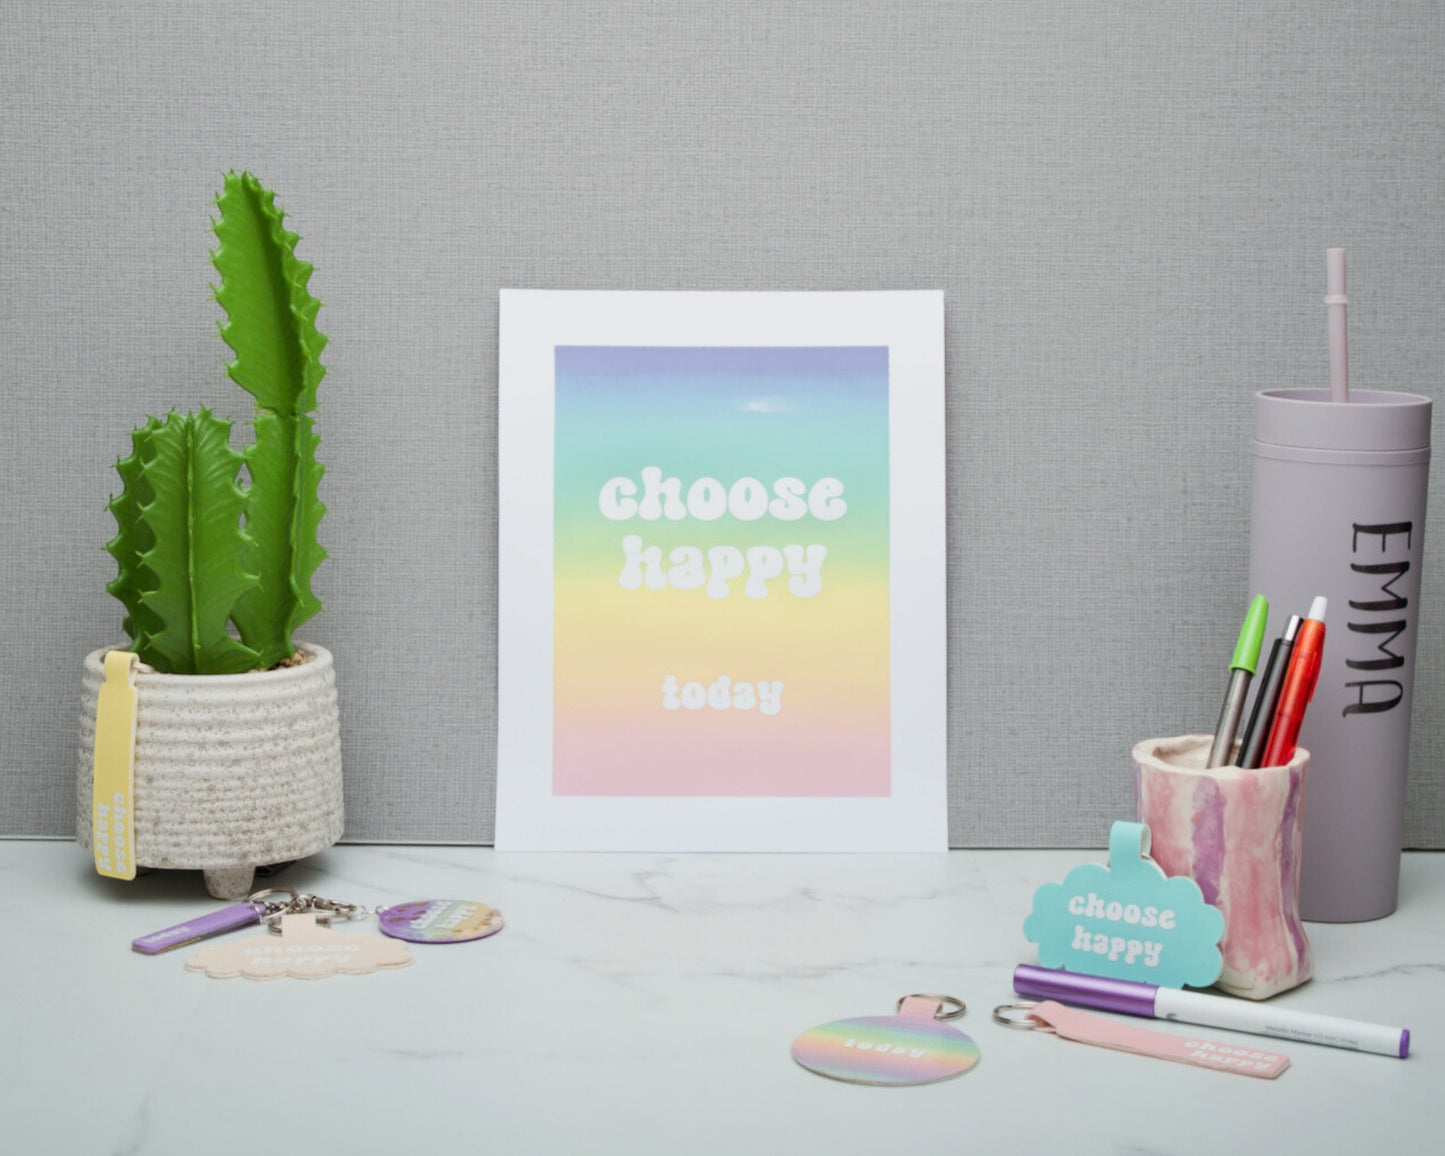 Choose Happy Today Limited Edition Screen Print, Blended Rainbow Wall Art, Self Care Inspirational Quotes, 8 x 10 inches, Best Friend Gifts